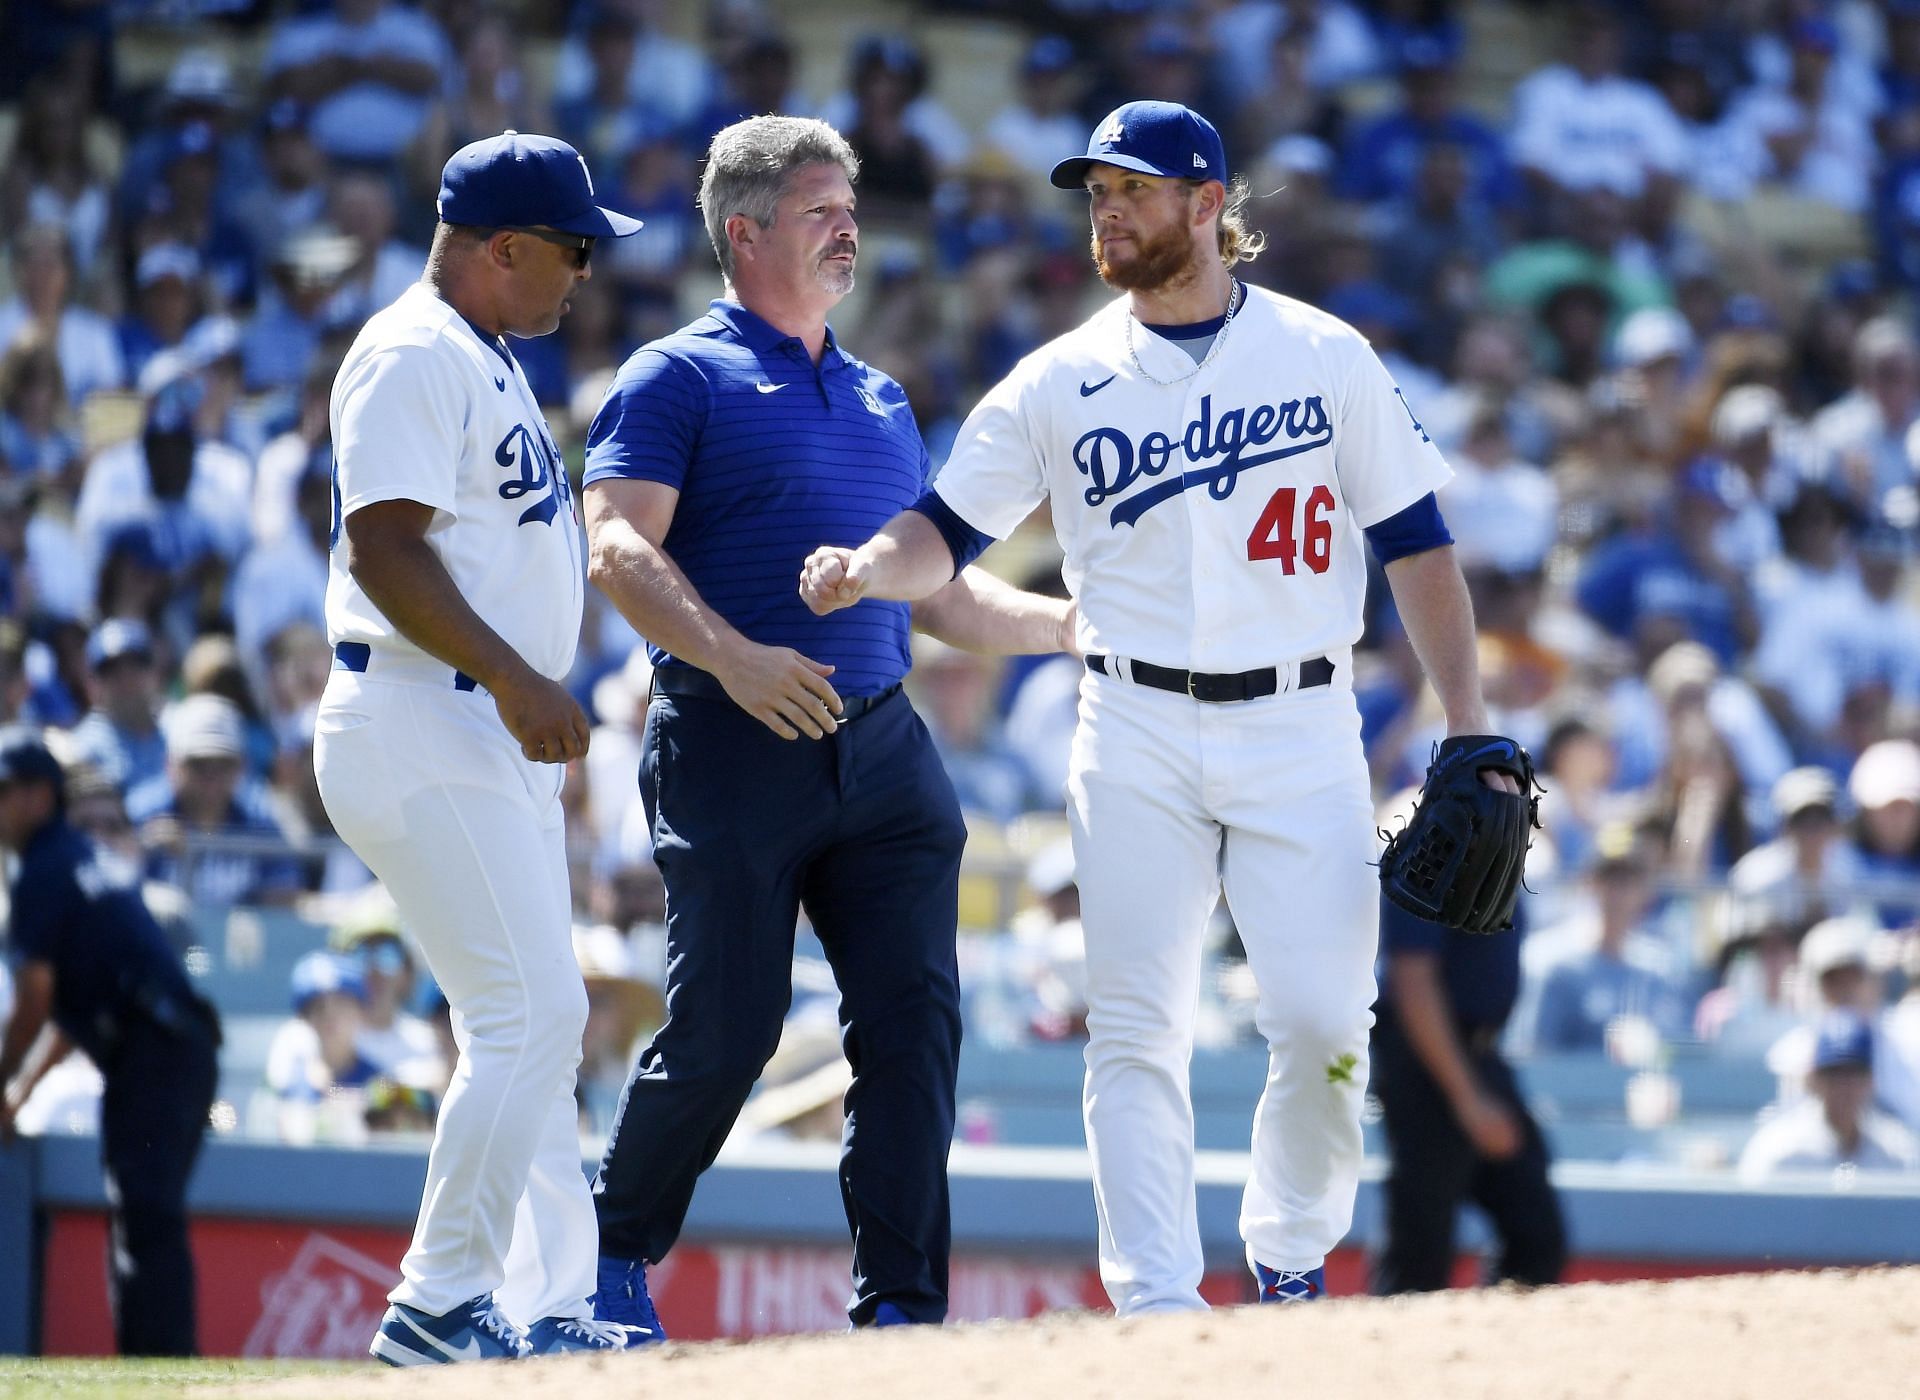 Craig Kimbrel blows save as Dodgers fall to D-backs in 10 innings